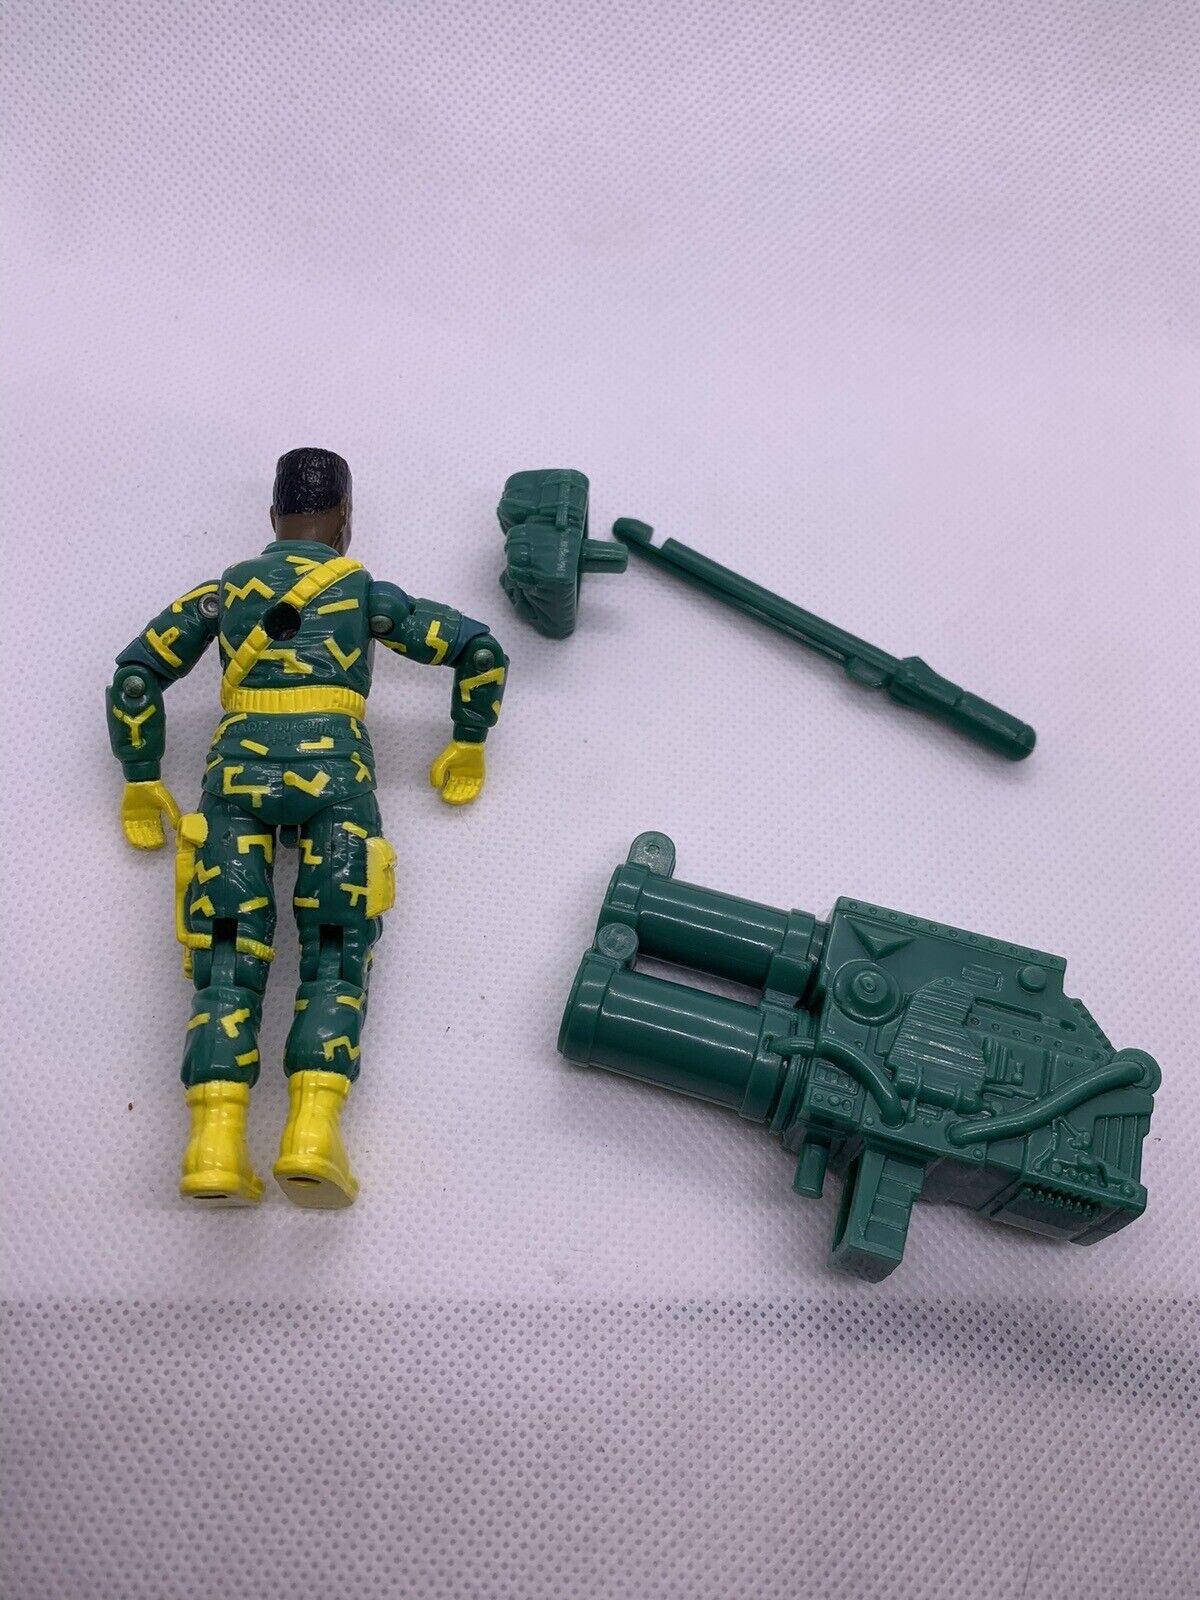 Vintage GI Joe Action Figure 1992 Bullet Proof with Accessories